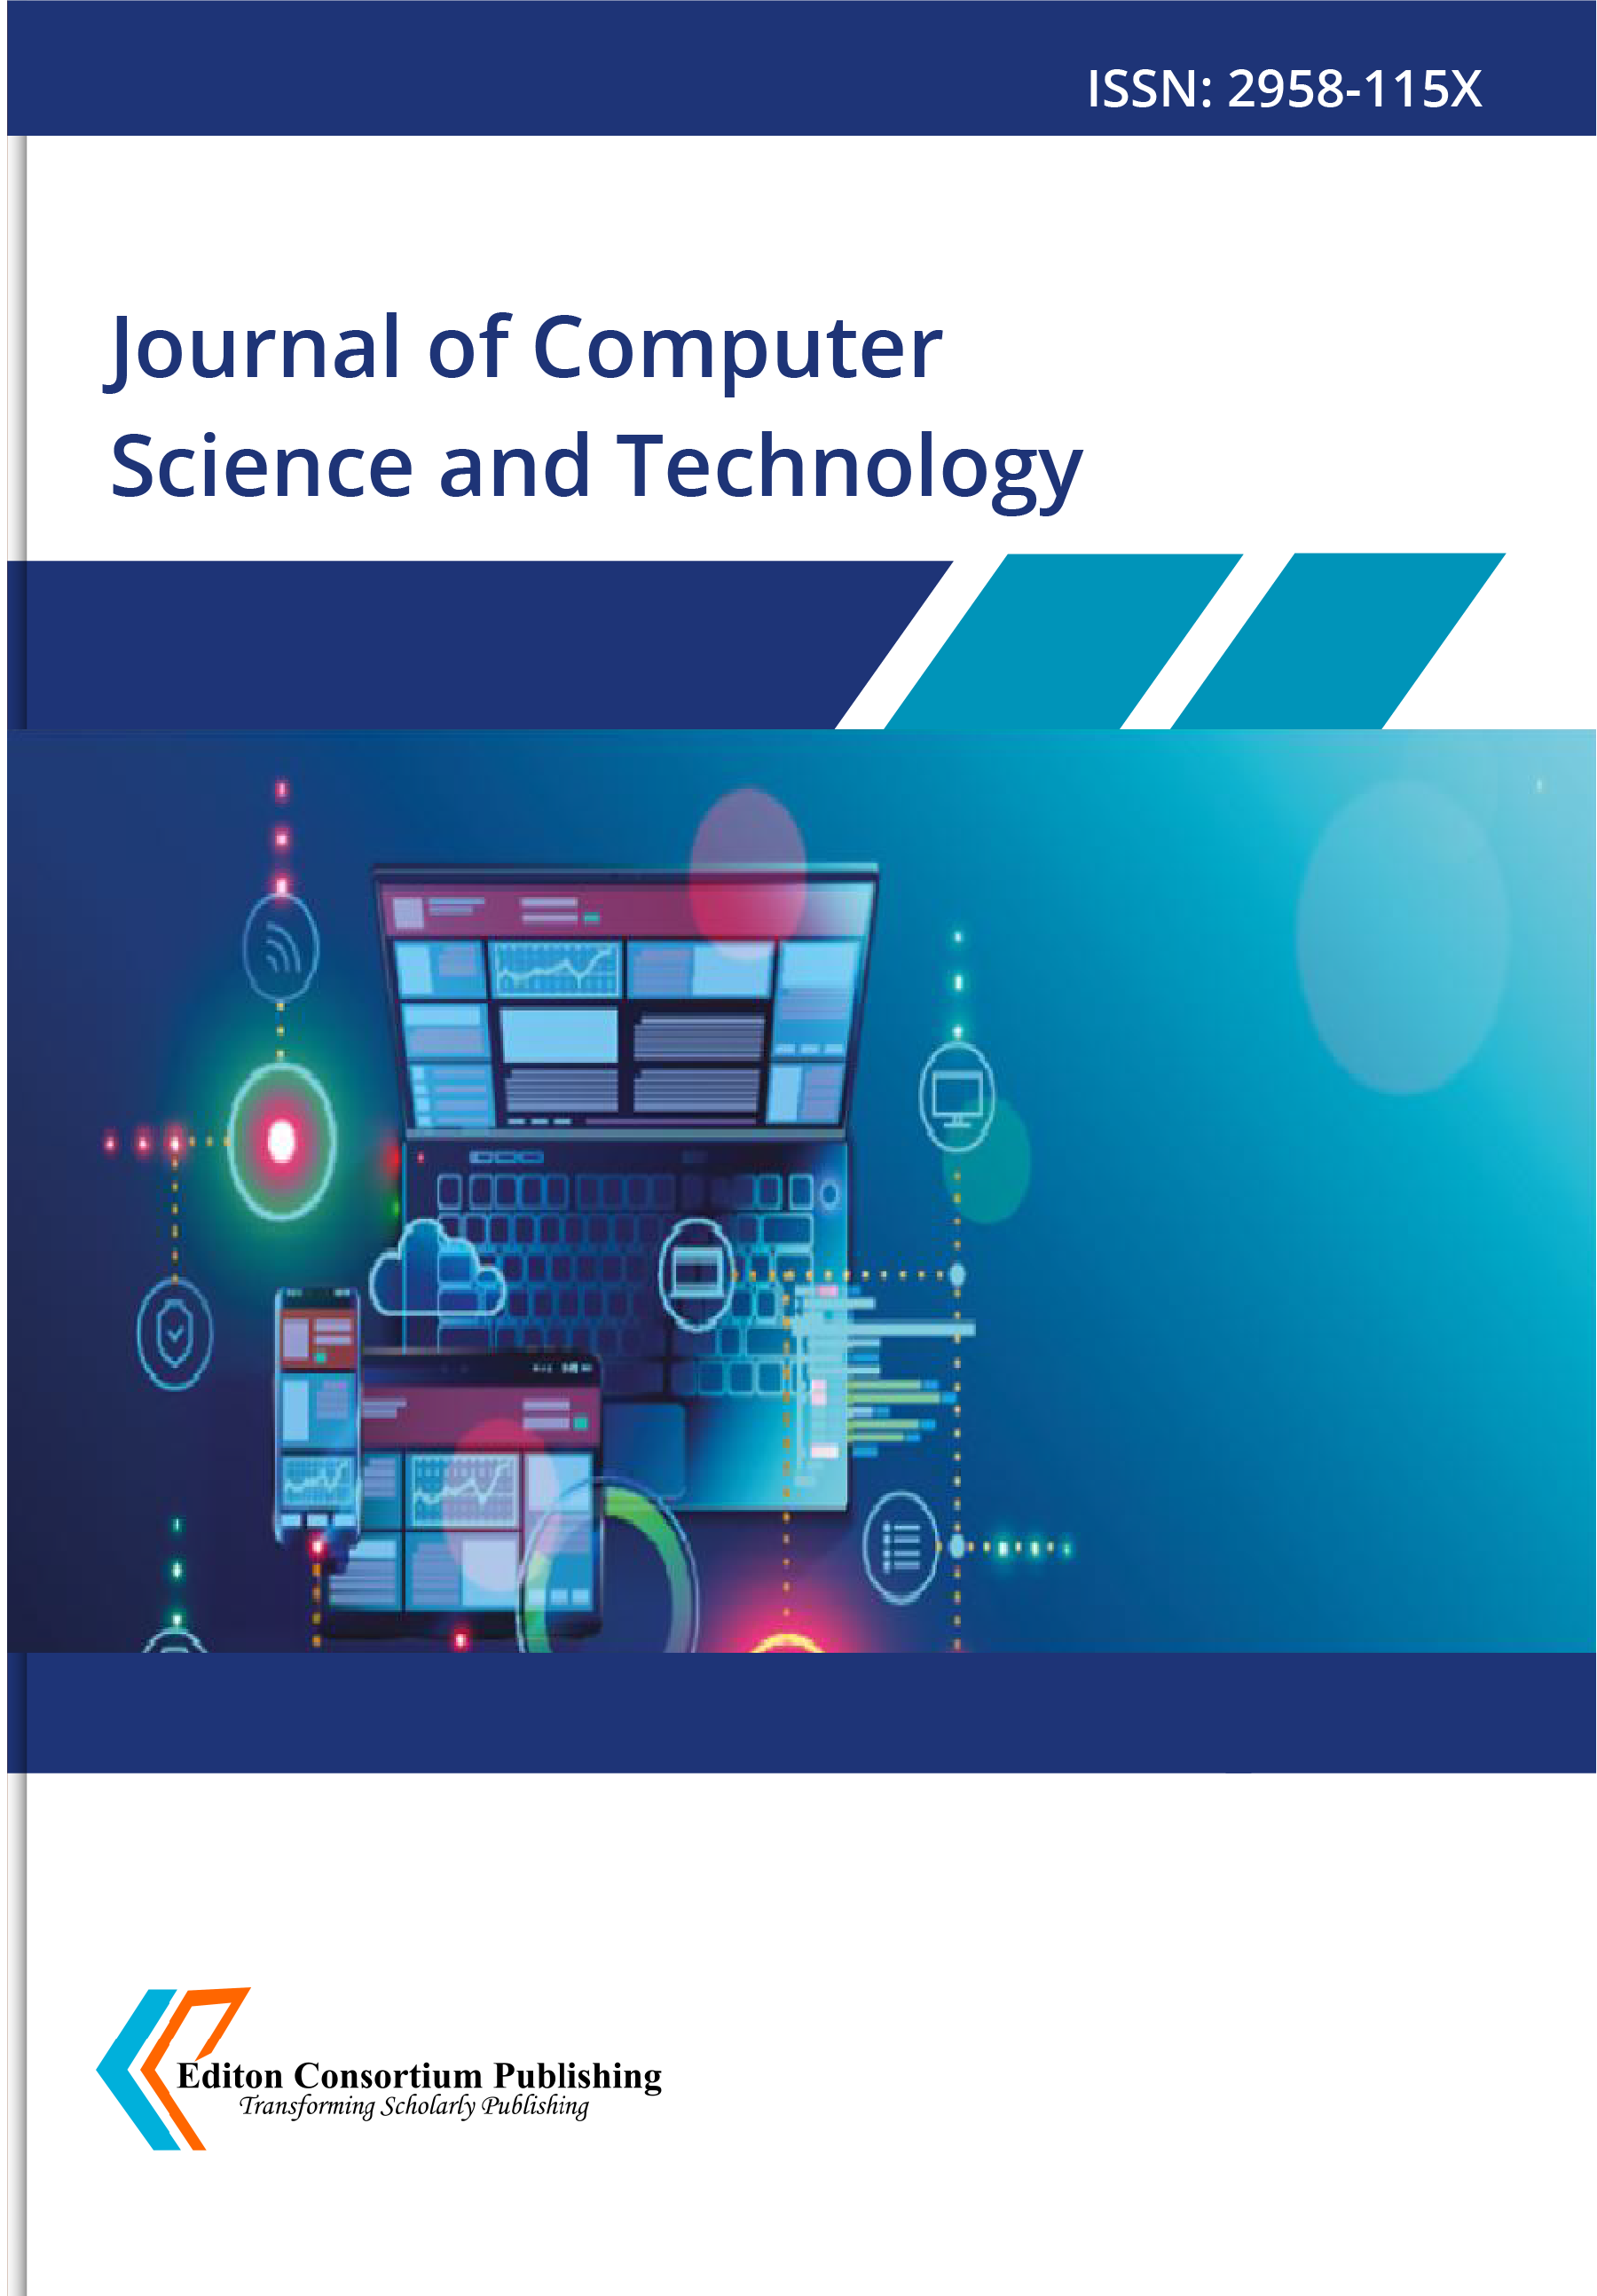  Journal of Computer Science and Technology